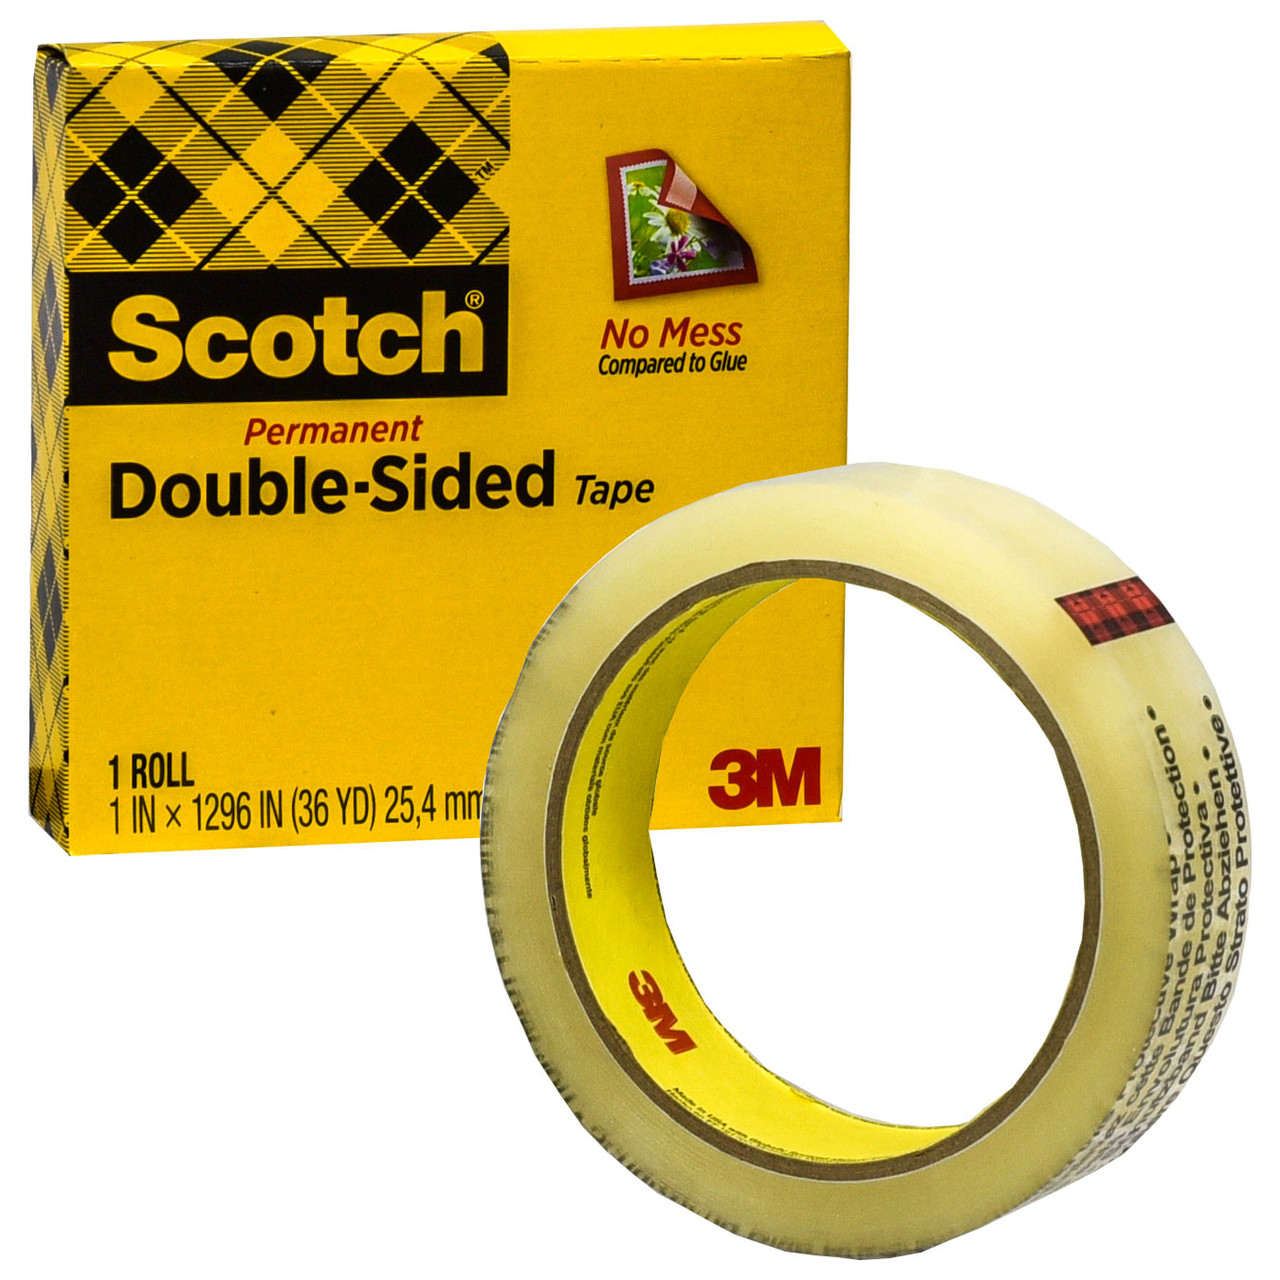 Scotch 665 Permanent Double Sided Tape, 1 x 1296, 3 Core